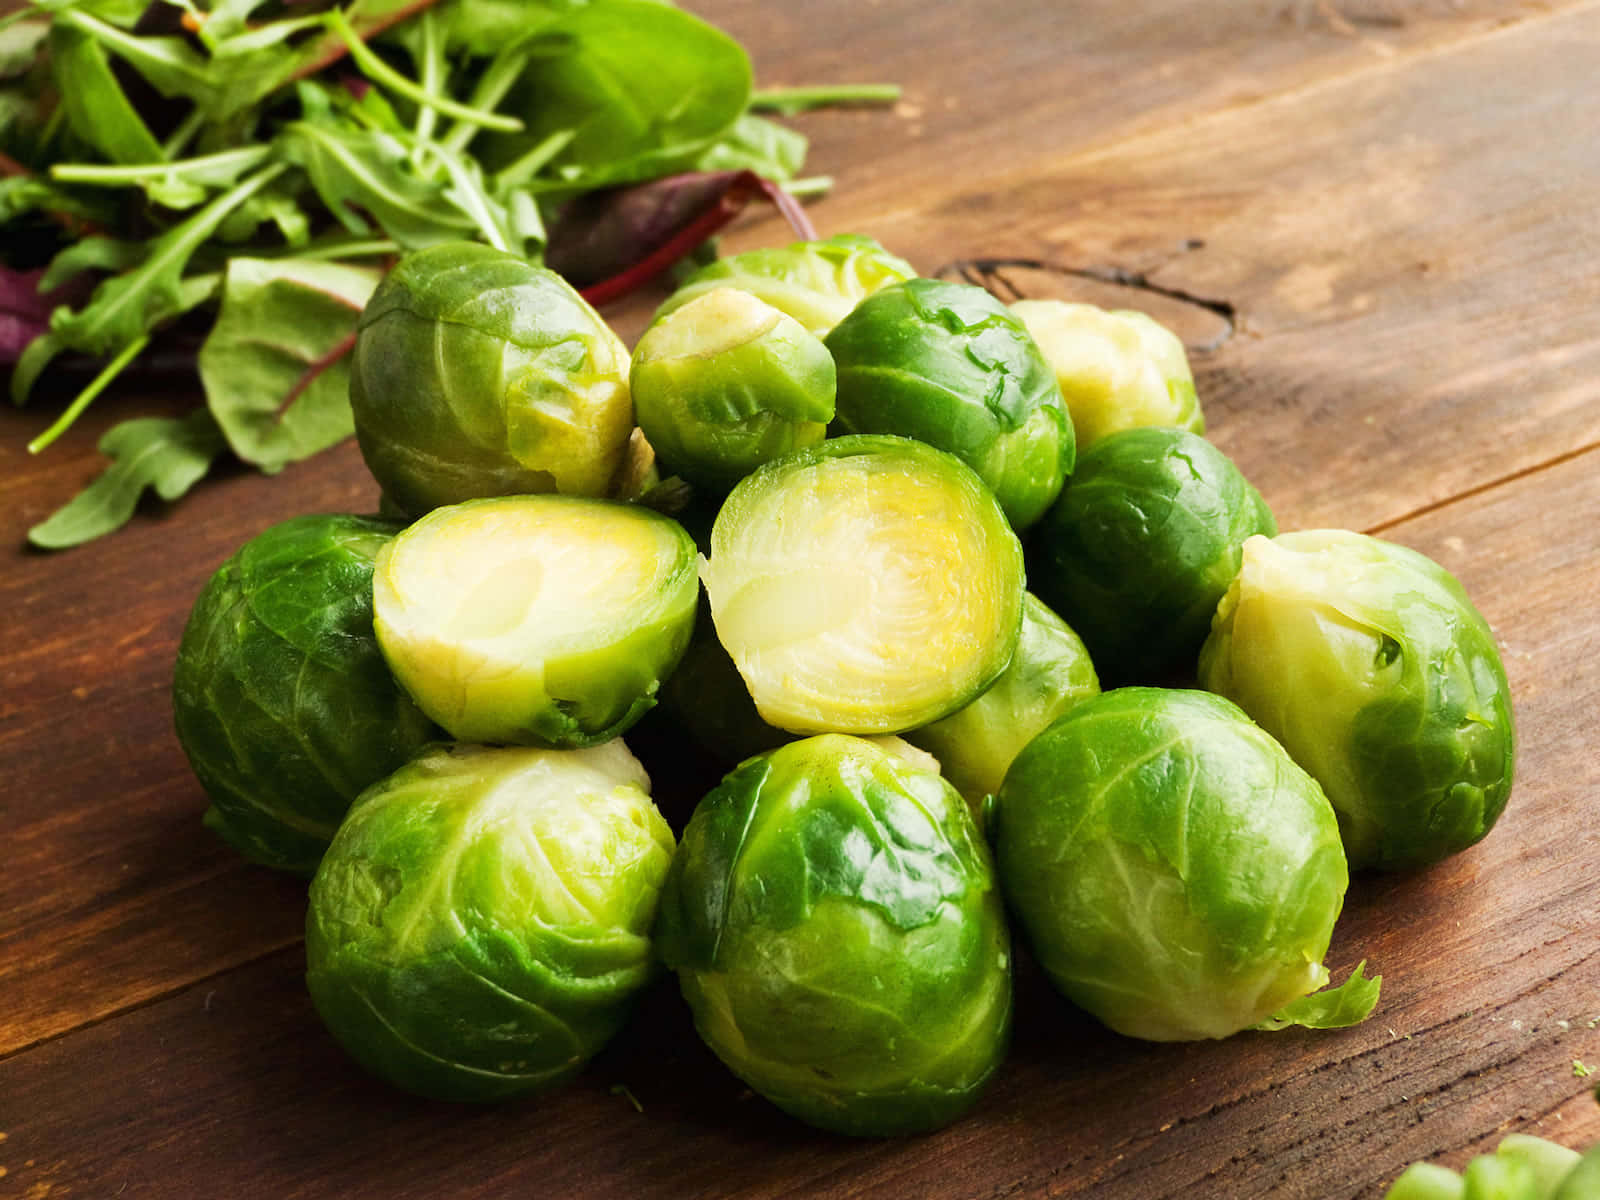 Brussel Sprouts On A Wooden Table